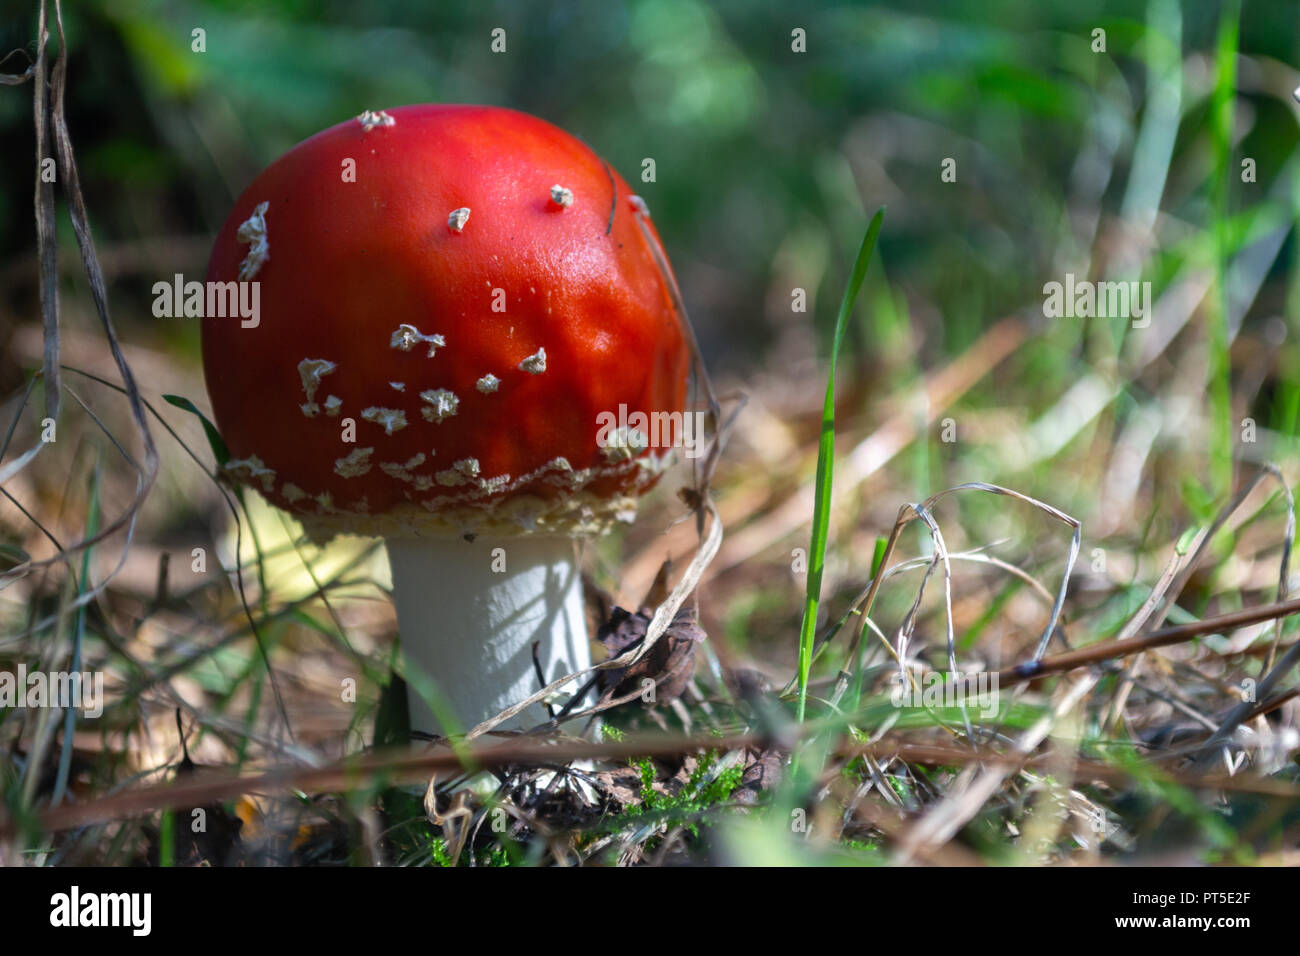 A close up of a toadstool in the forest showing deep red colour with white flecks Stock Photo